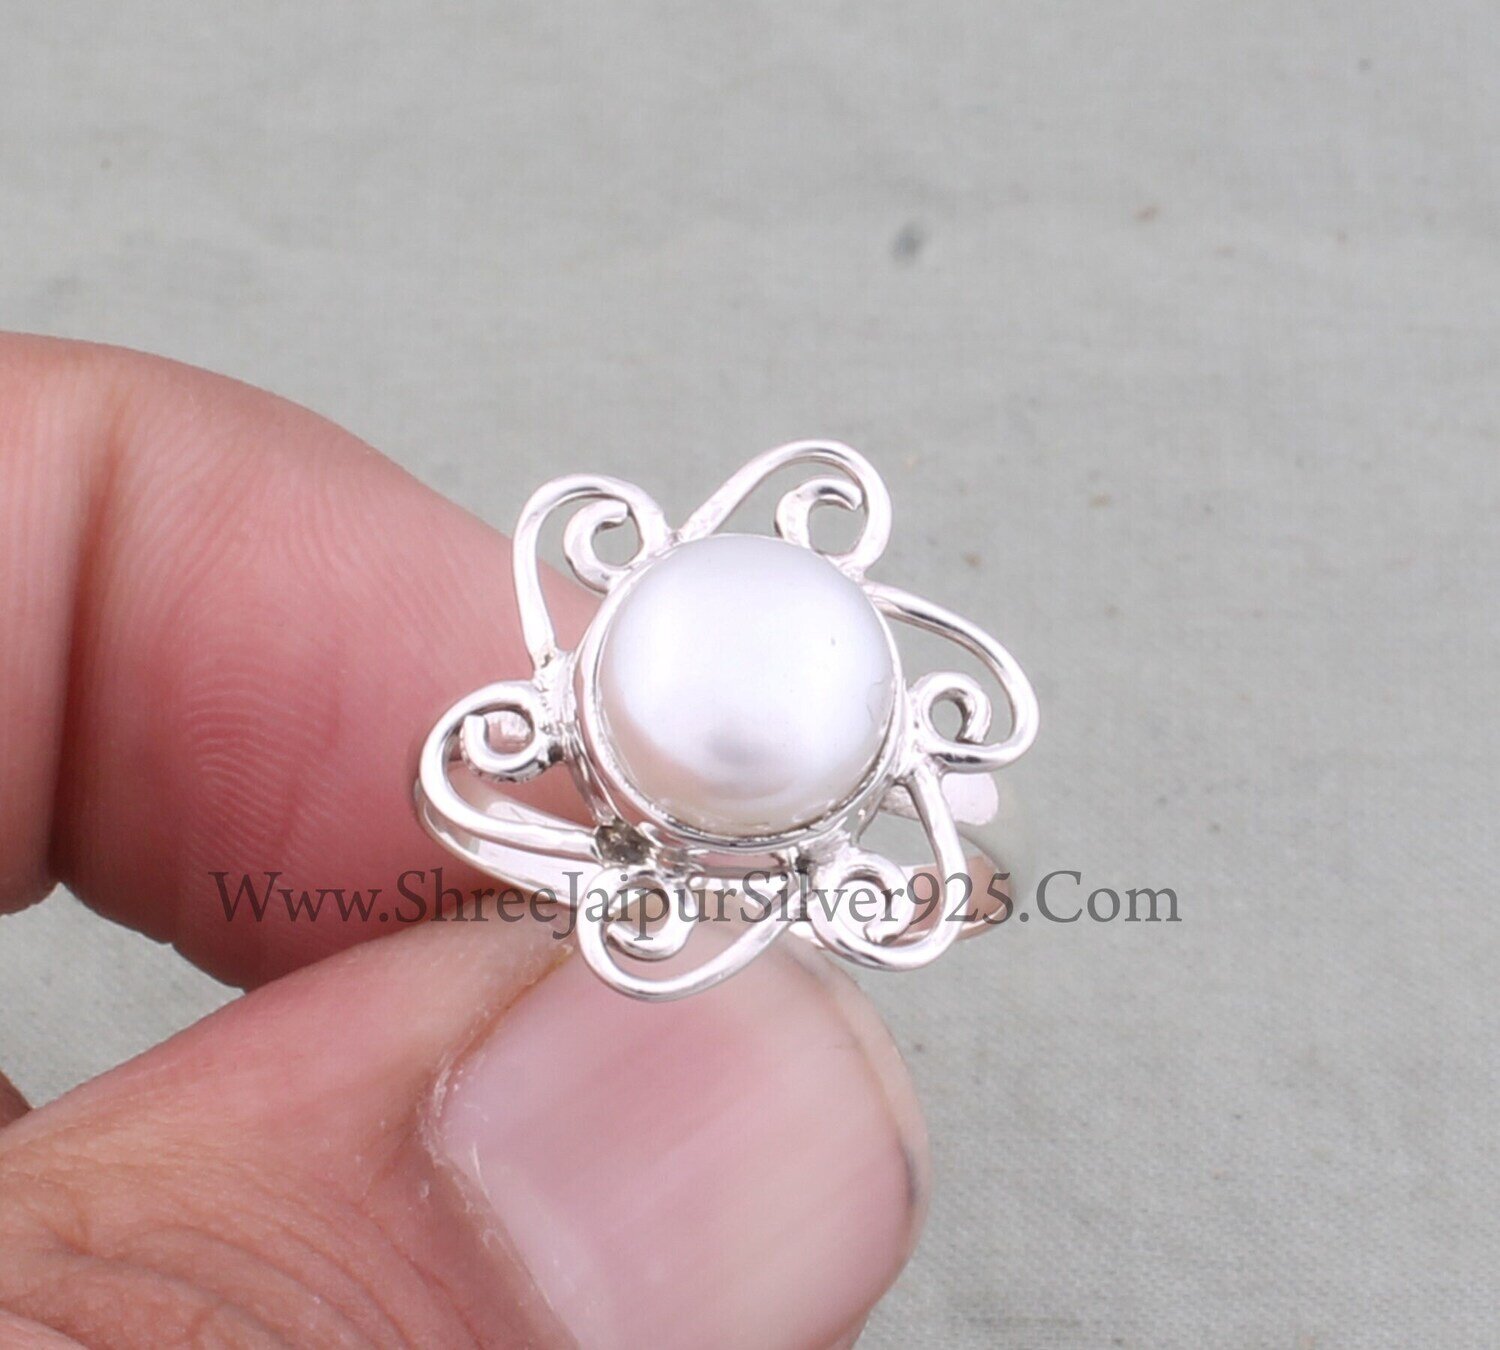 Natural Pearl Solid 925 Sterling Silver Ring For Women, Handmade Round Shape Silver Flower Fancy Round Ring Gifts For Her Bridesmaid Wedding